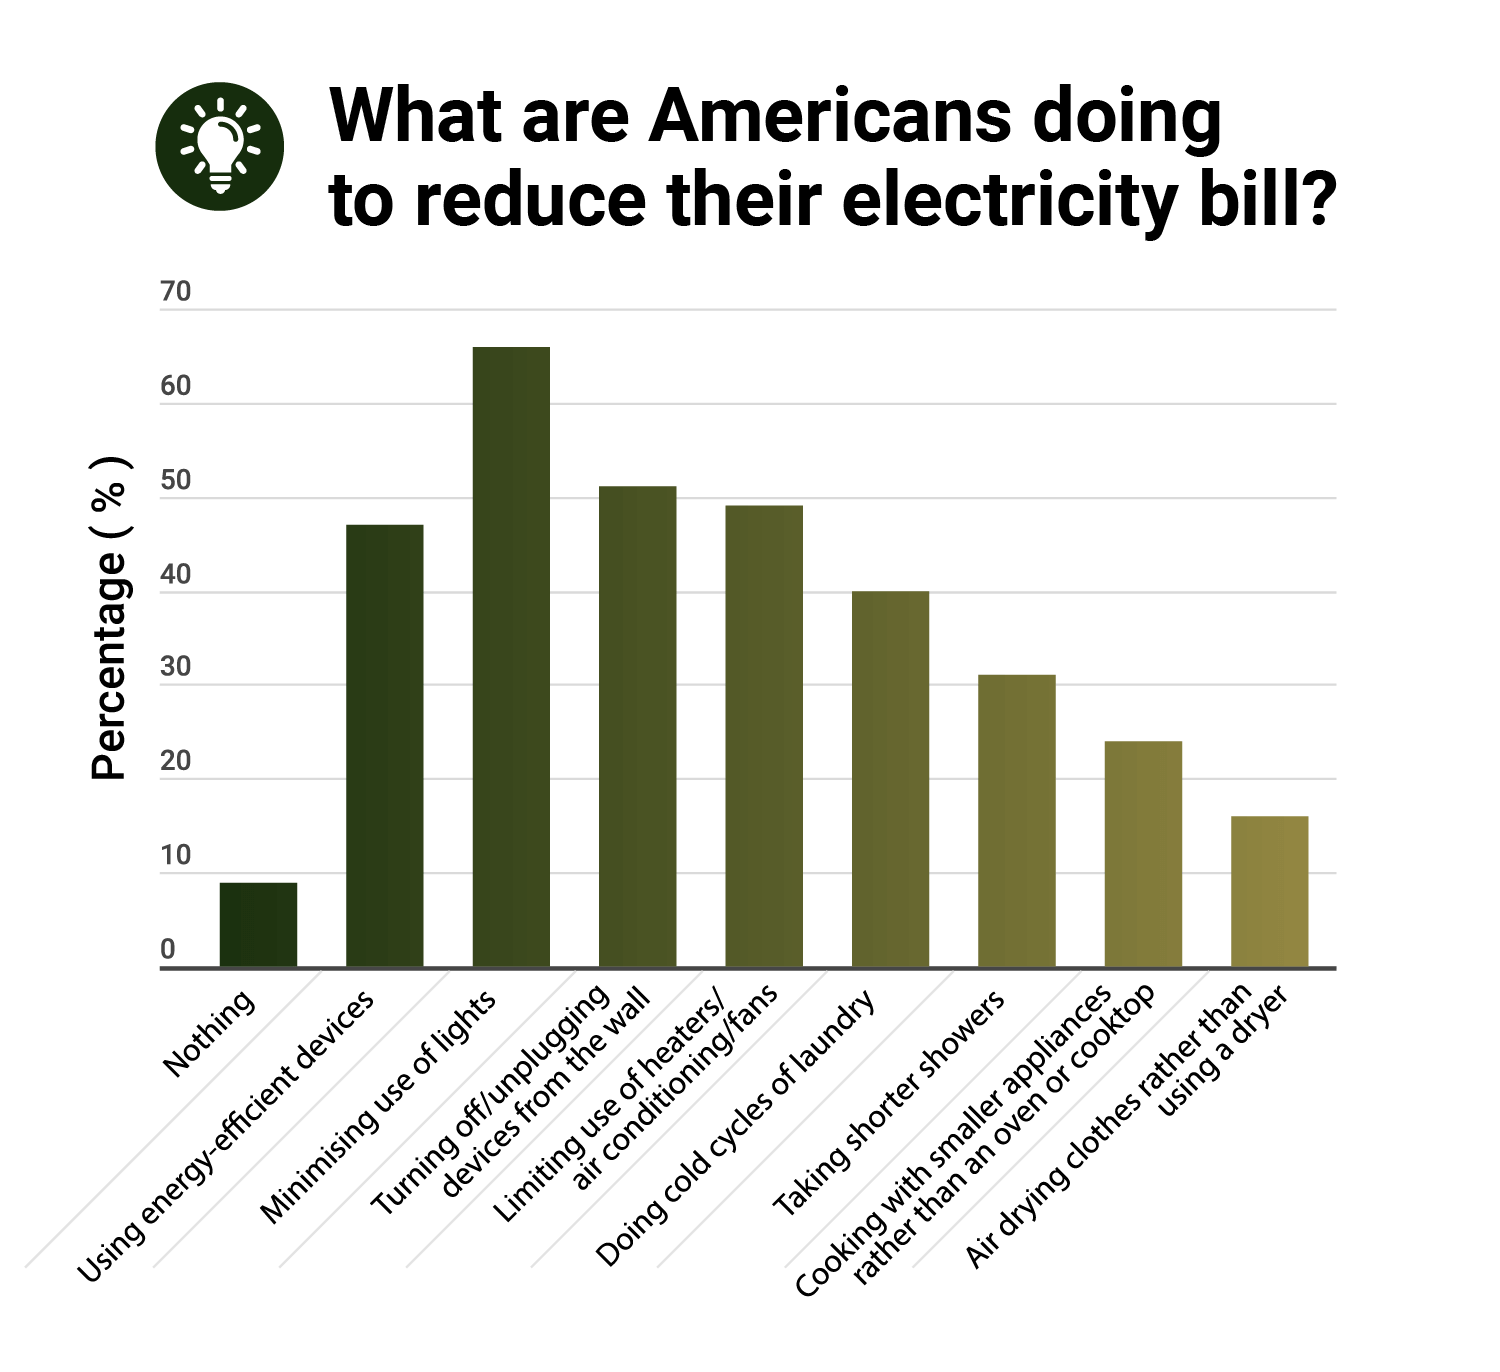 A bar chart showing how Americans combat electricity bills